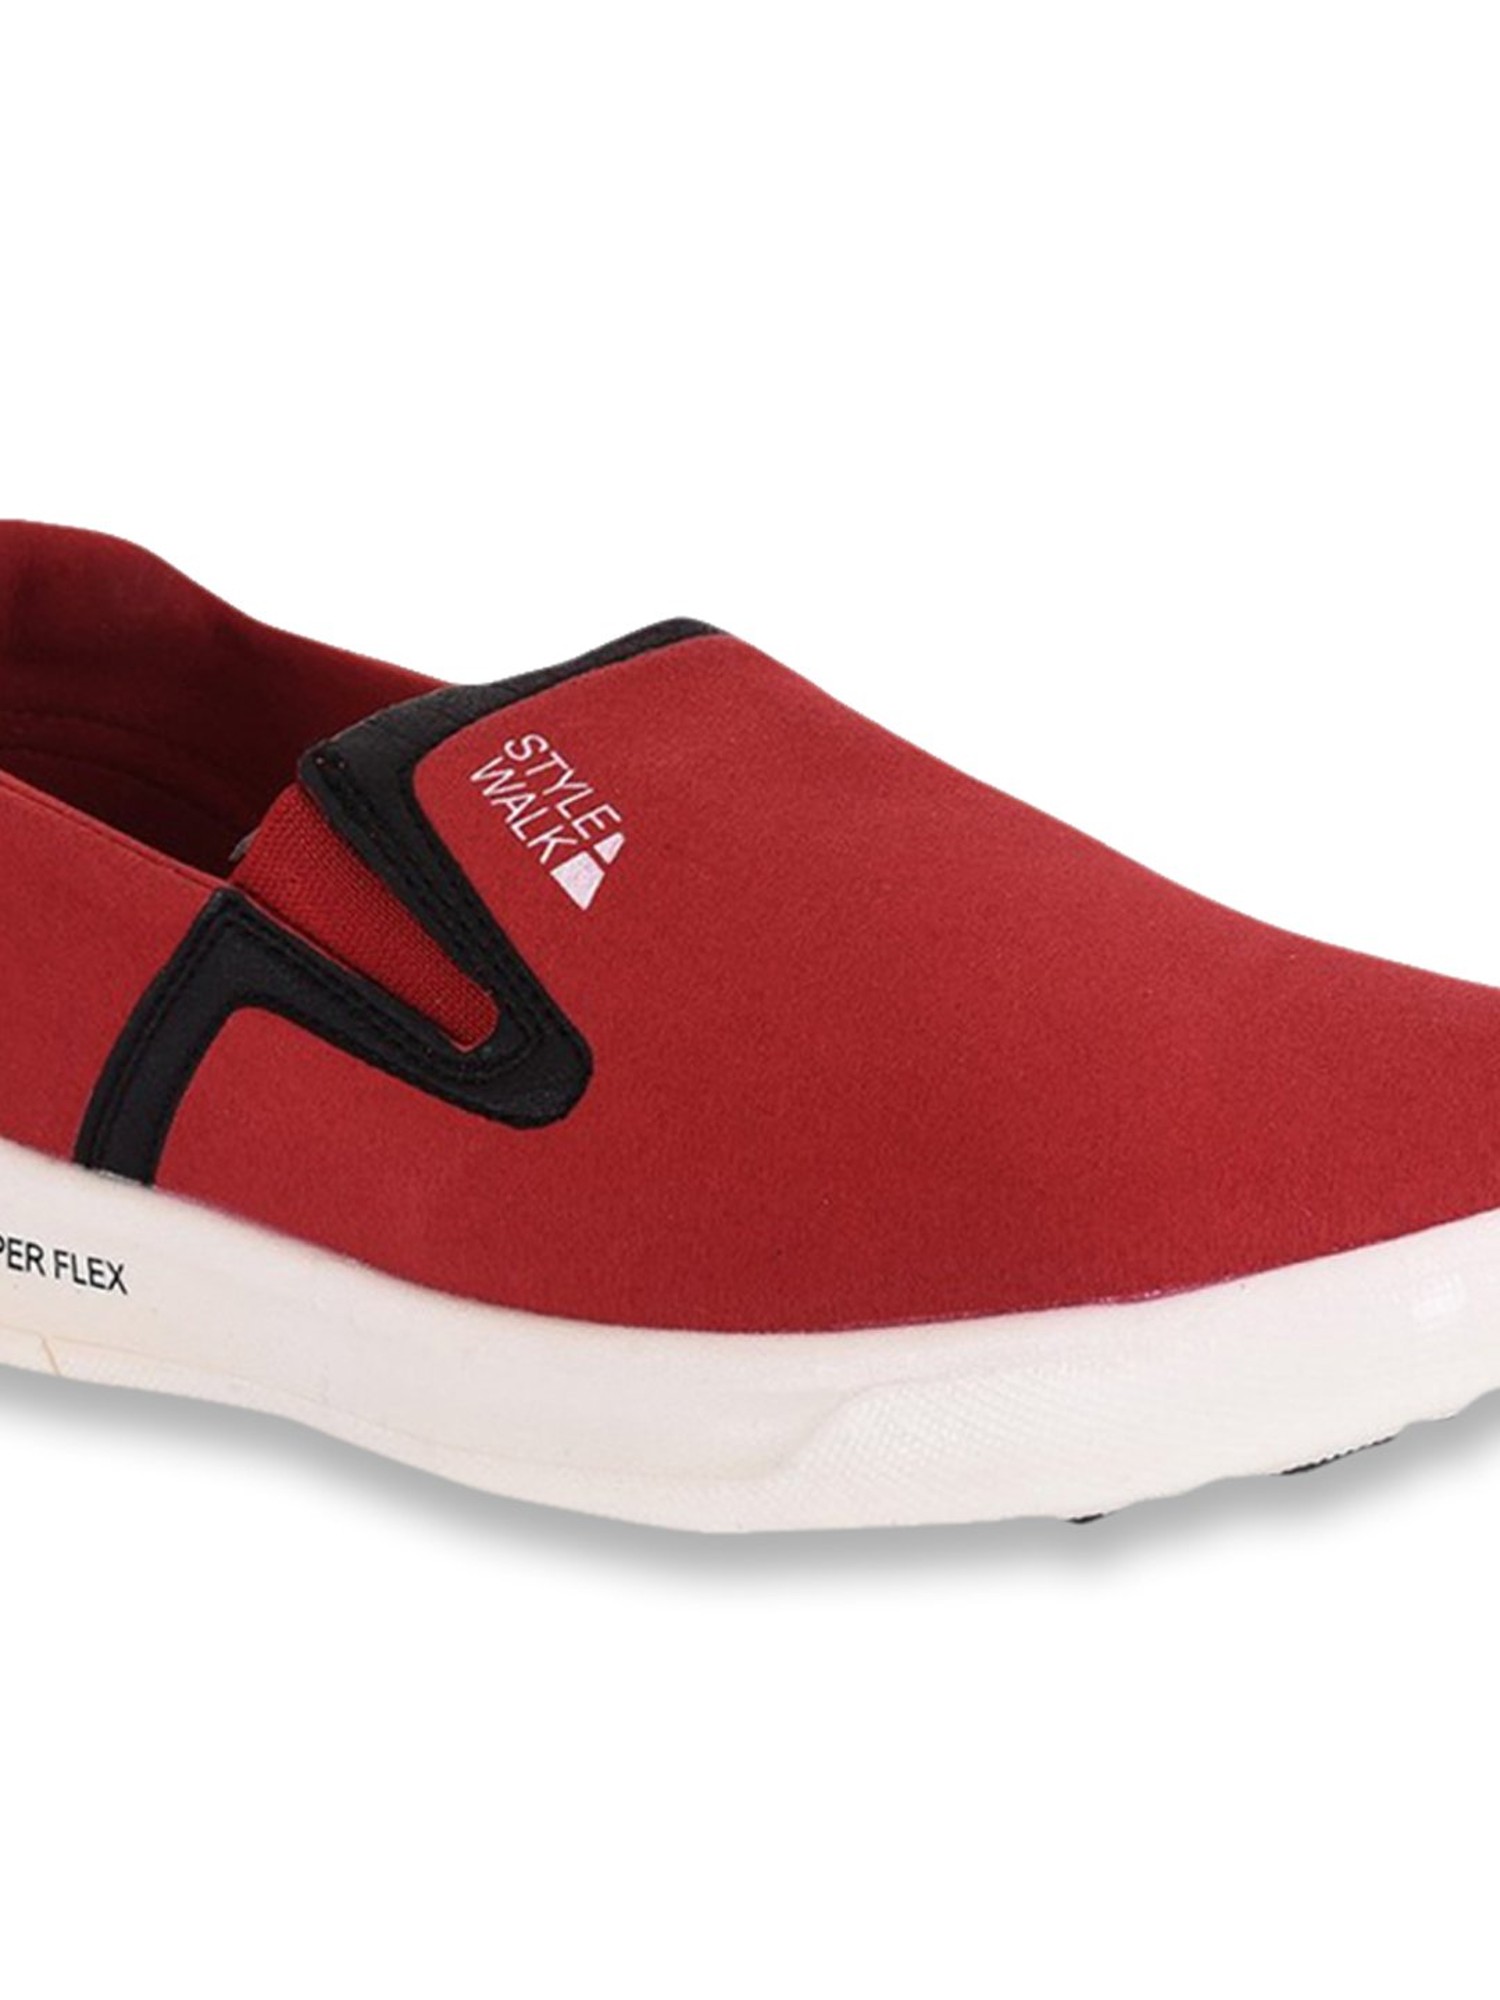 Buy Campus Style Walk Red Walking Shoes 